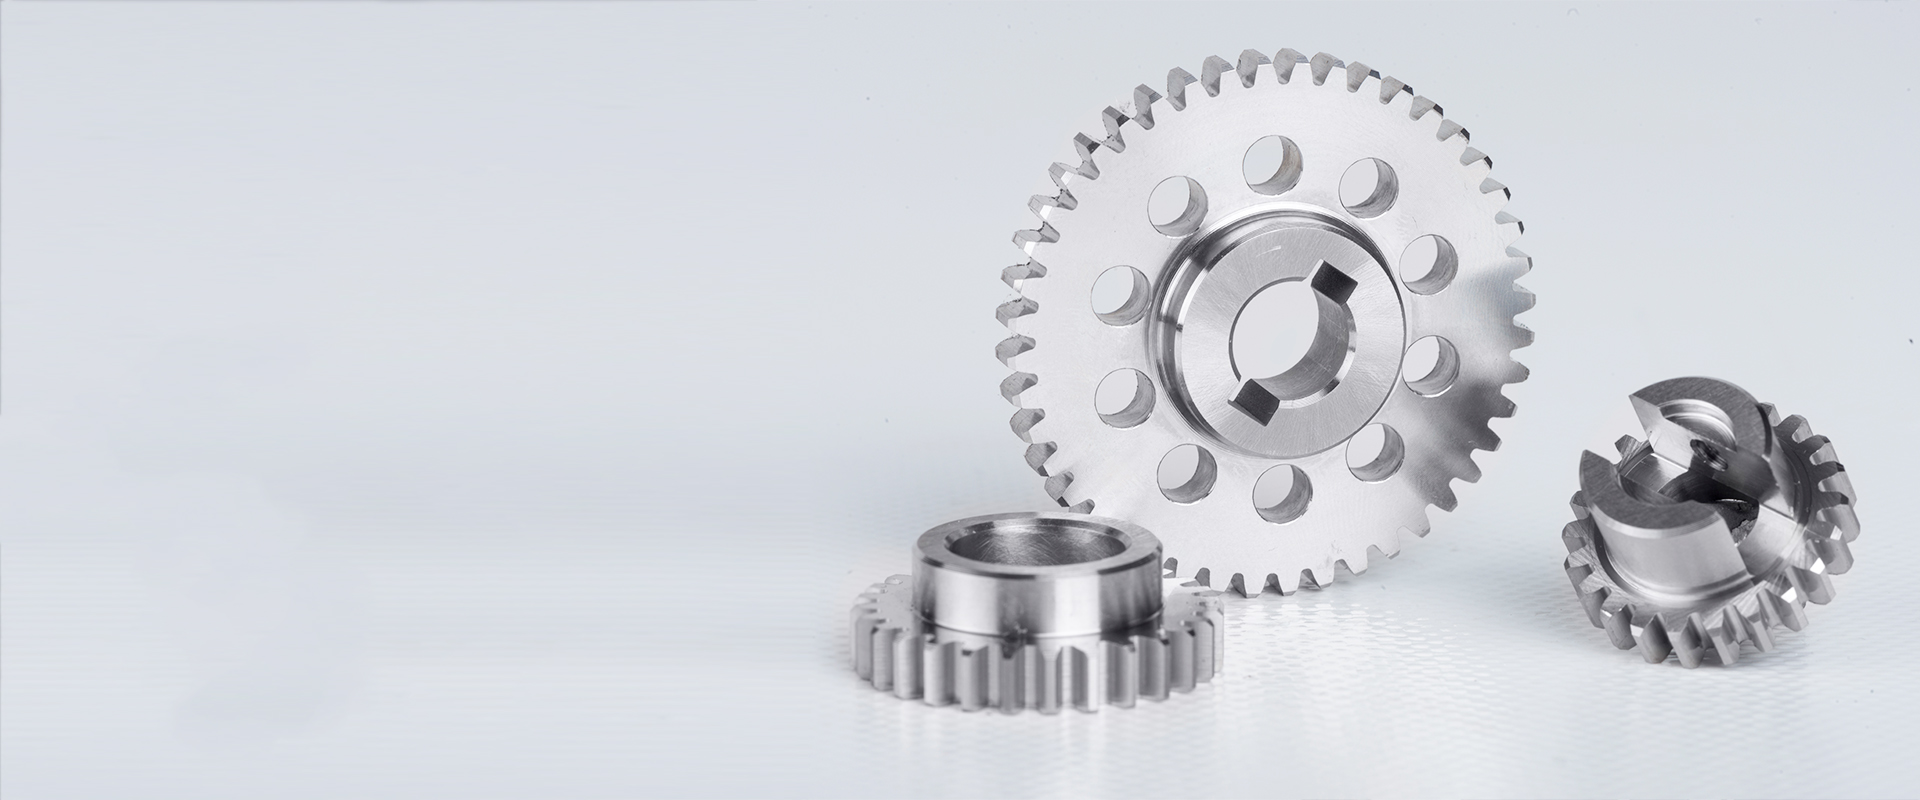 45 Years of Experience on<br>Gears and Gearboxes